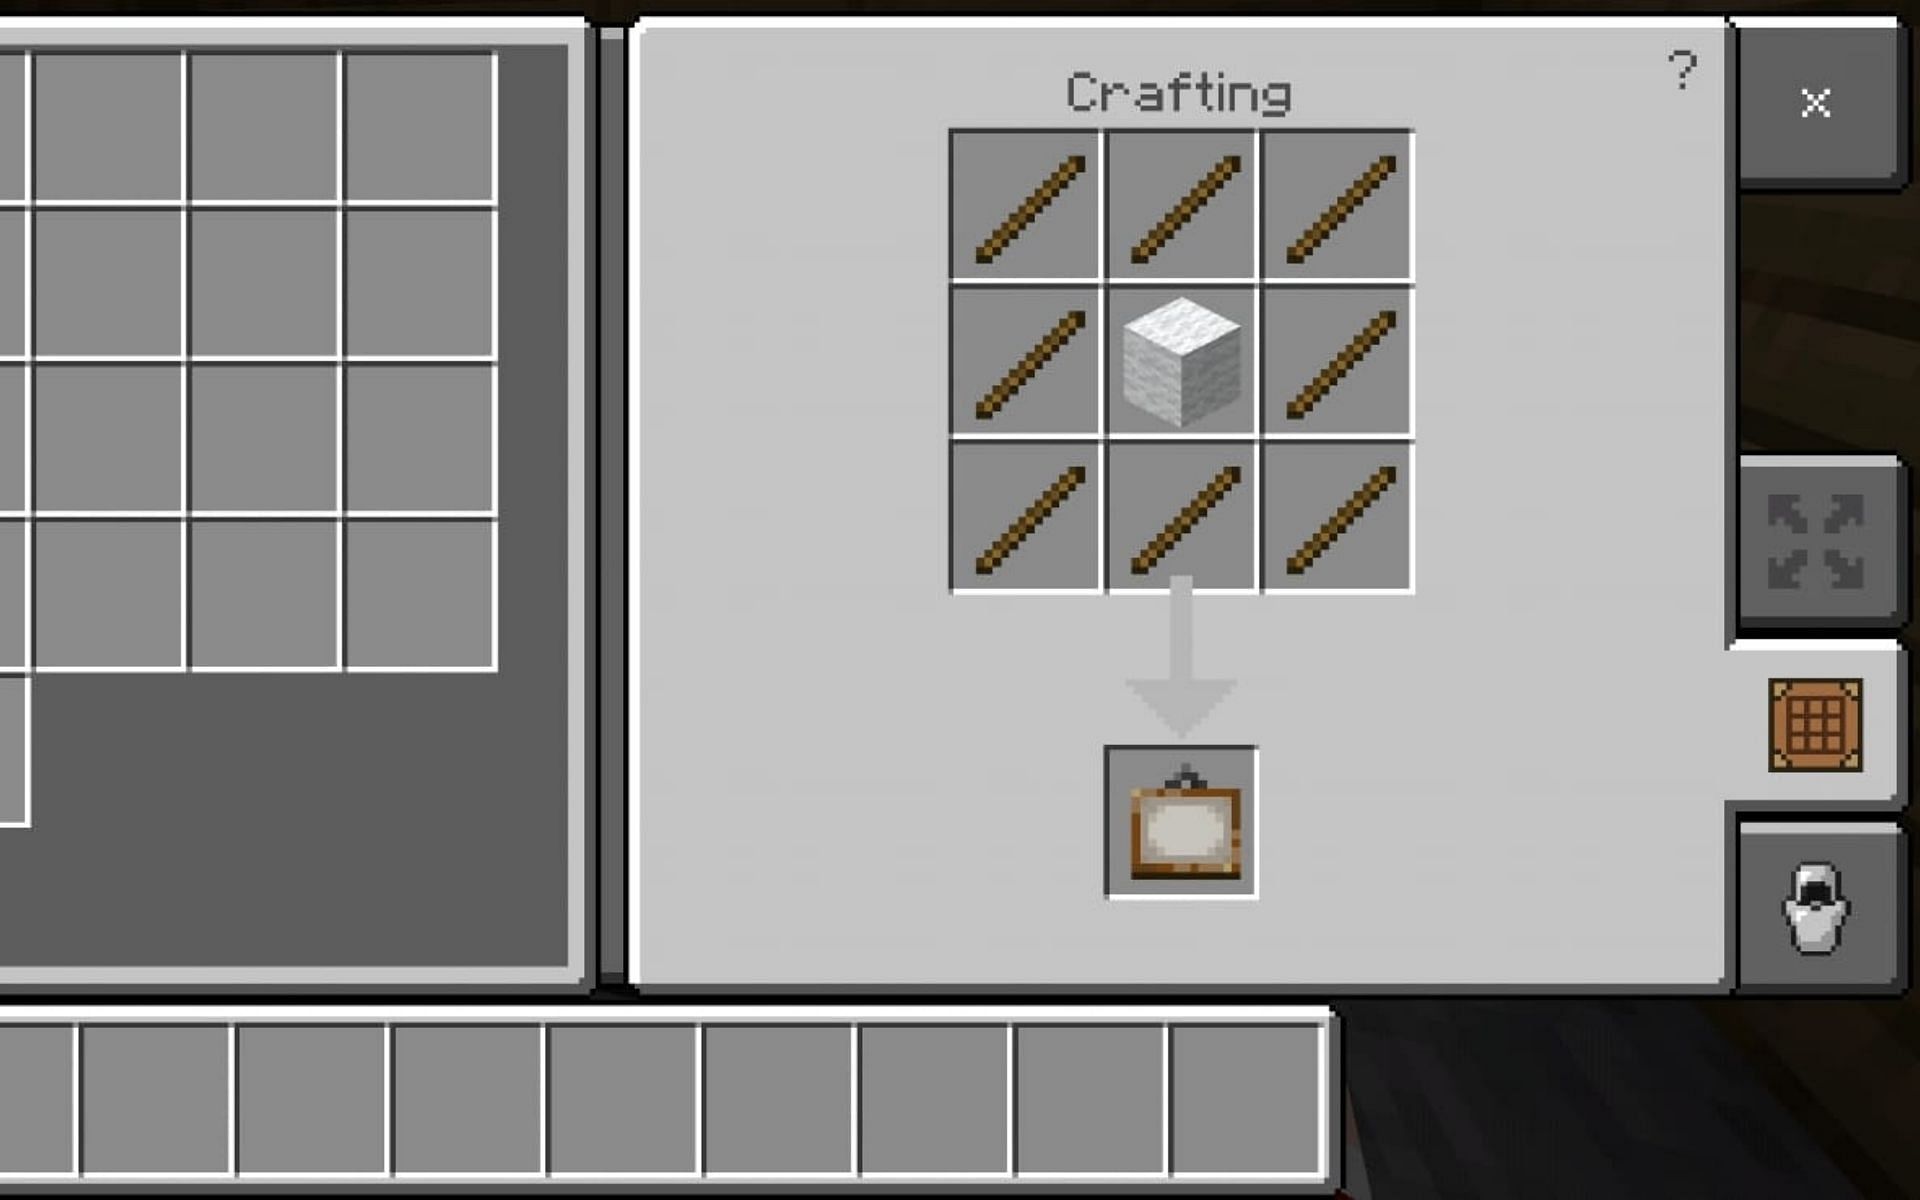 Placing of sticks and wool to create a painting (Image via Minecraft)